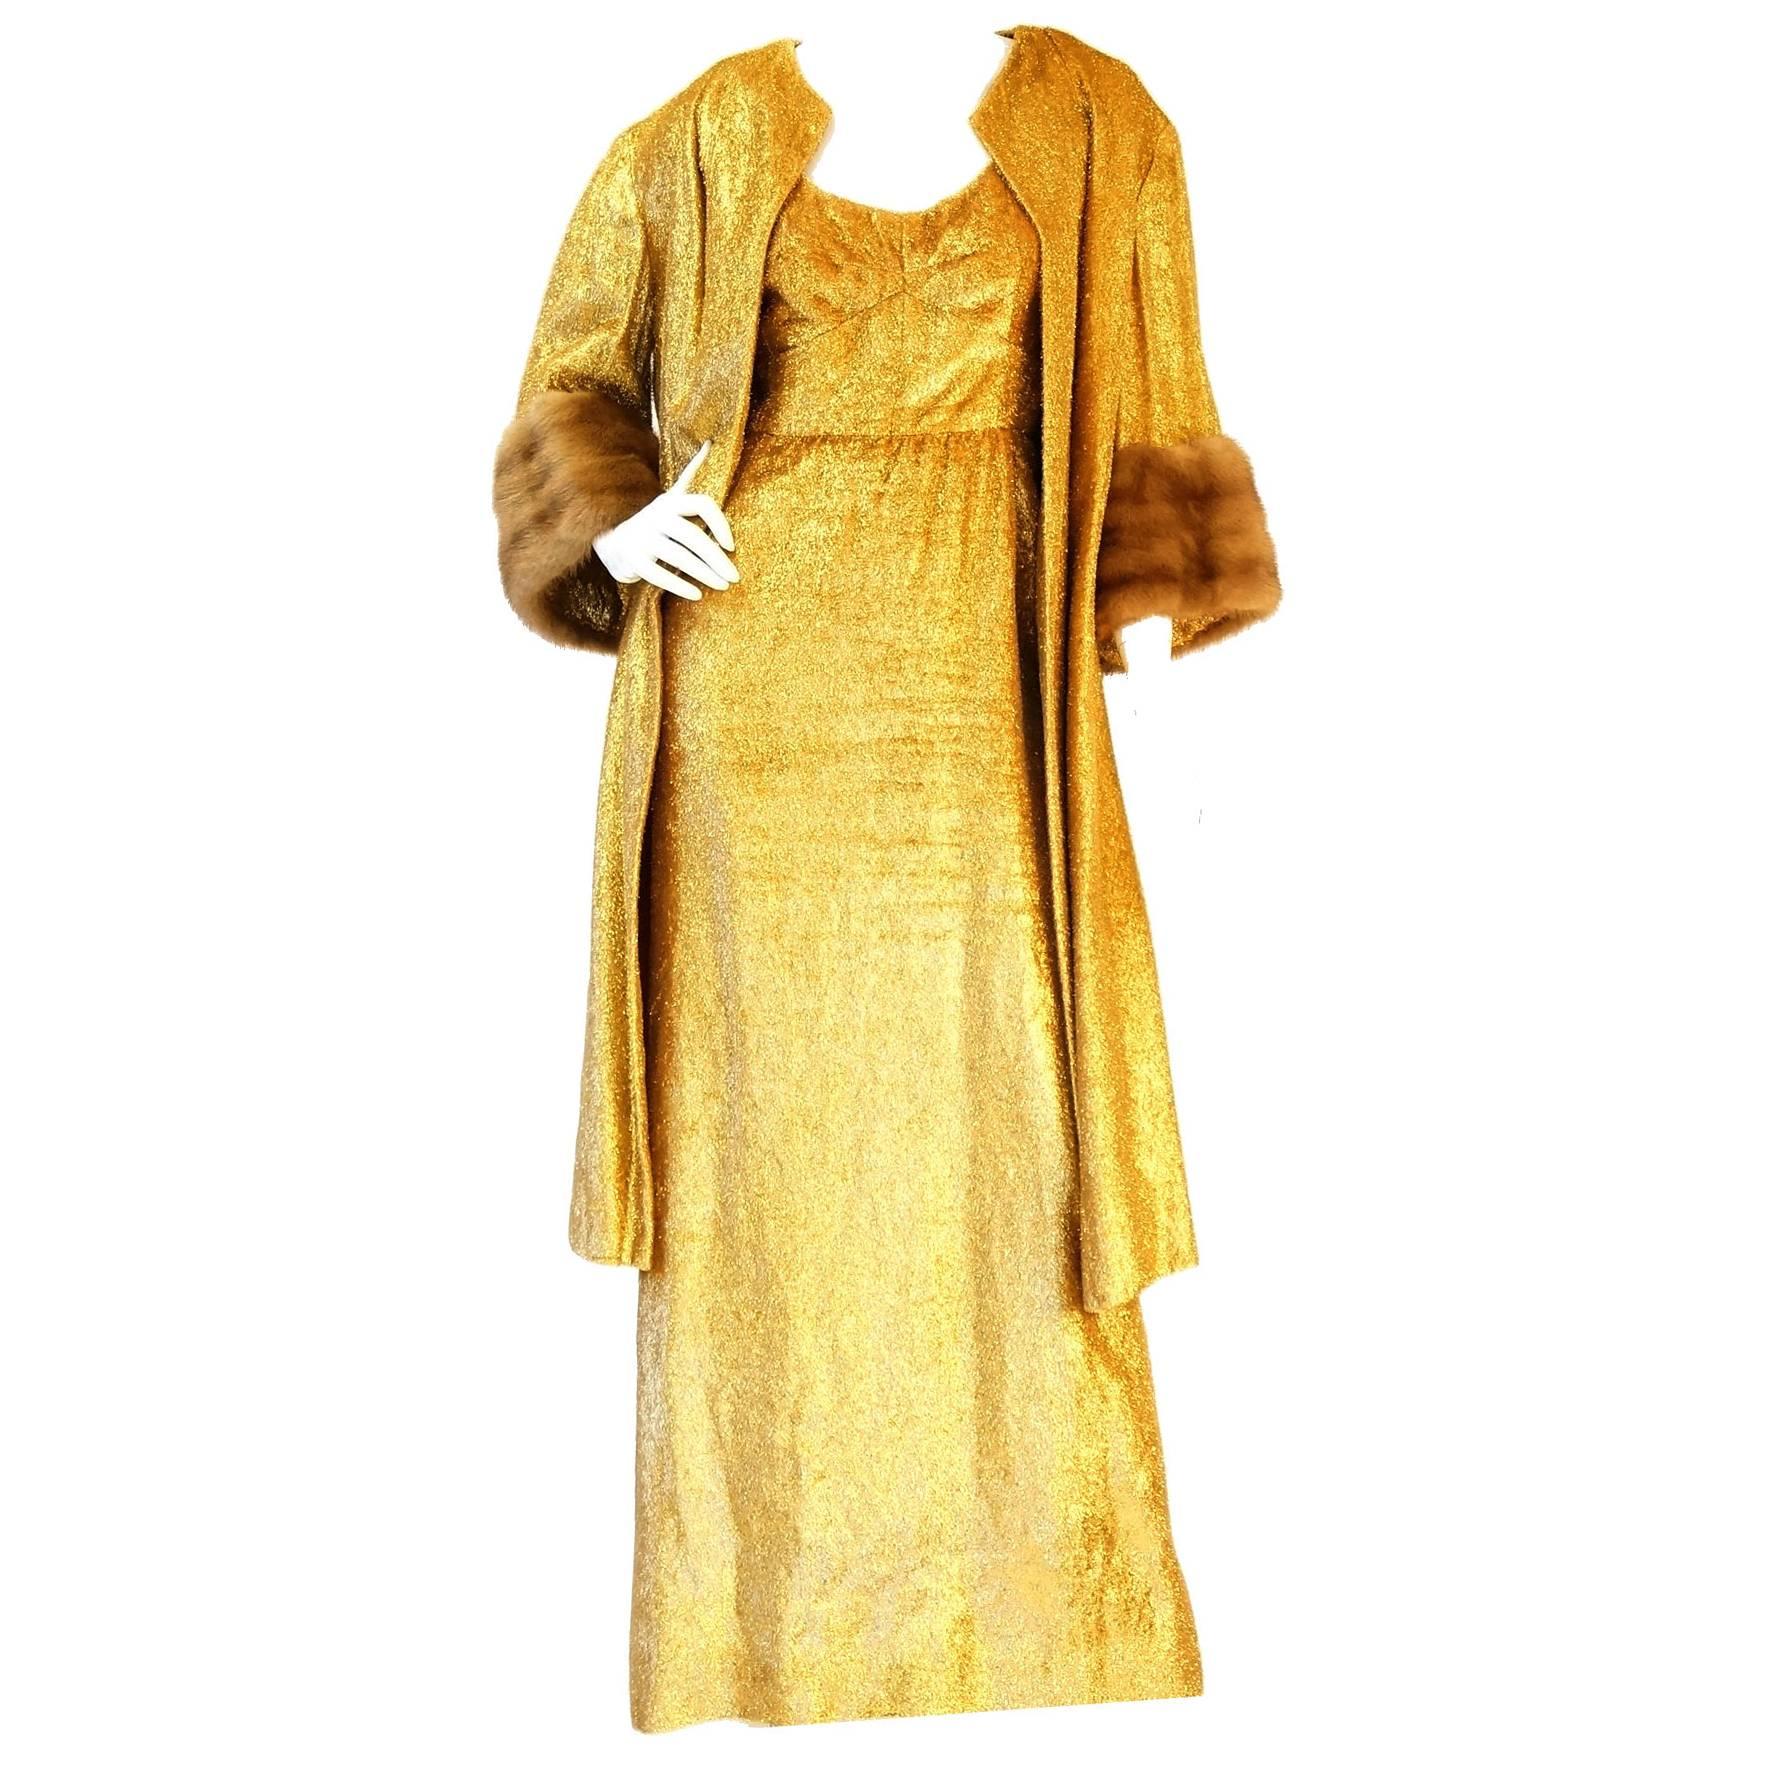 Rare 1960s Norman Hartnell Gold Lame and Mink Dress and Coat For Sale